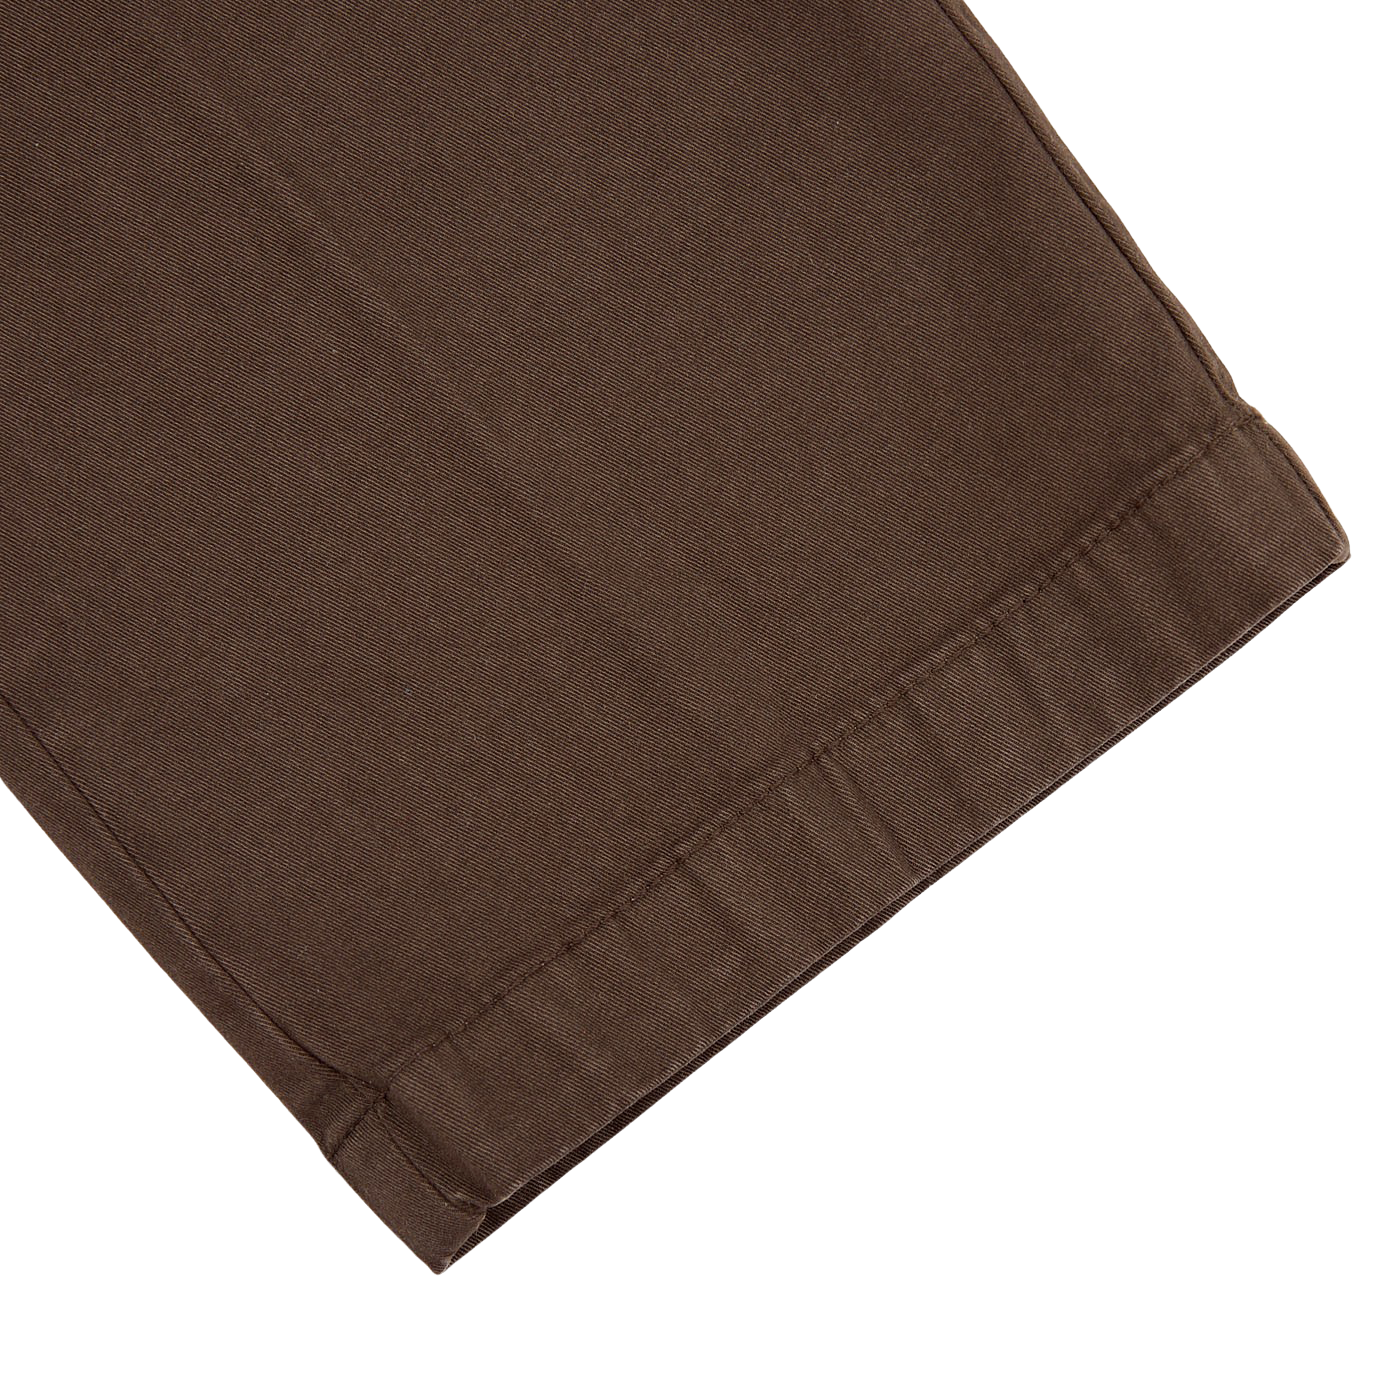 A close up of Berwich dark brown cotton stretch chinos.